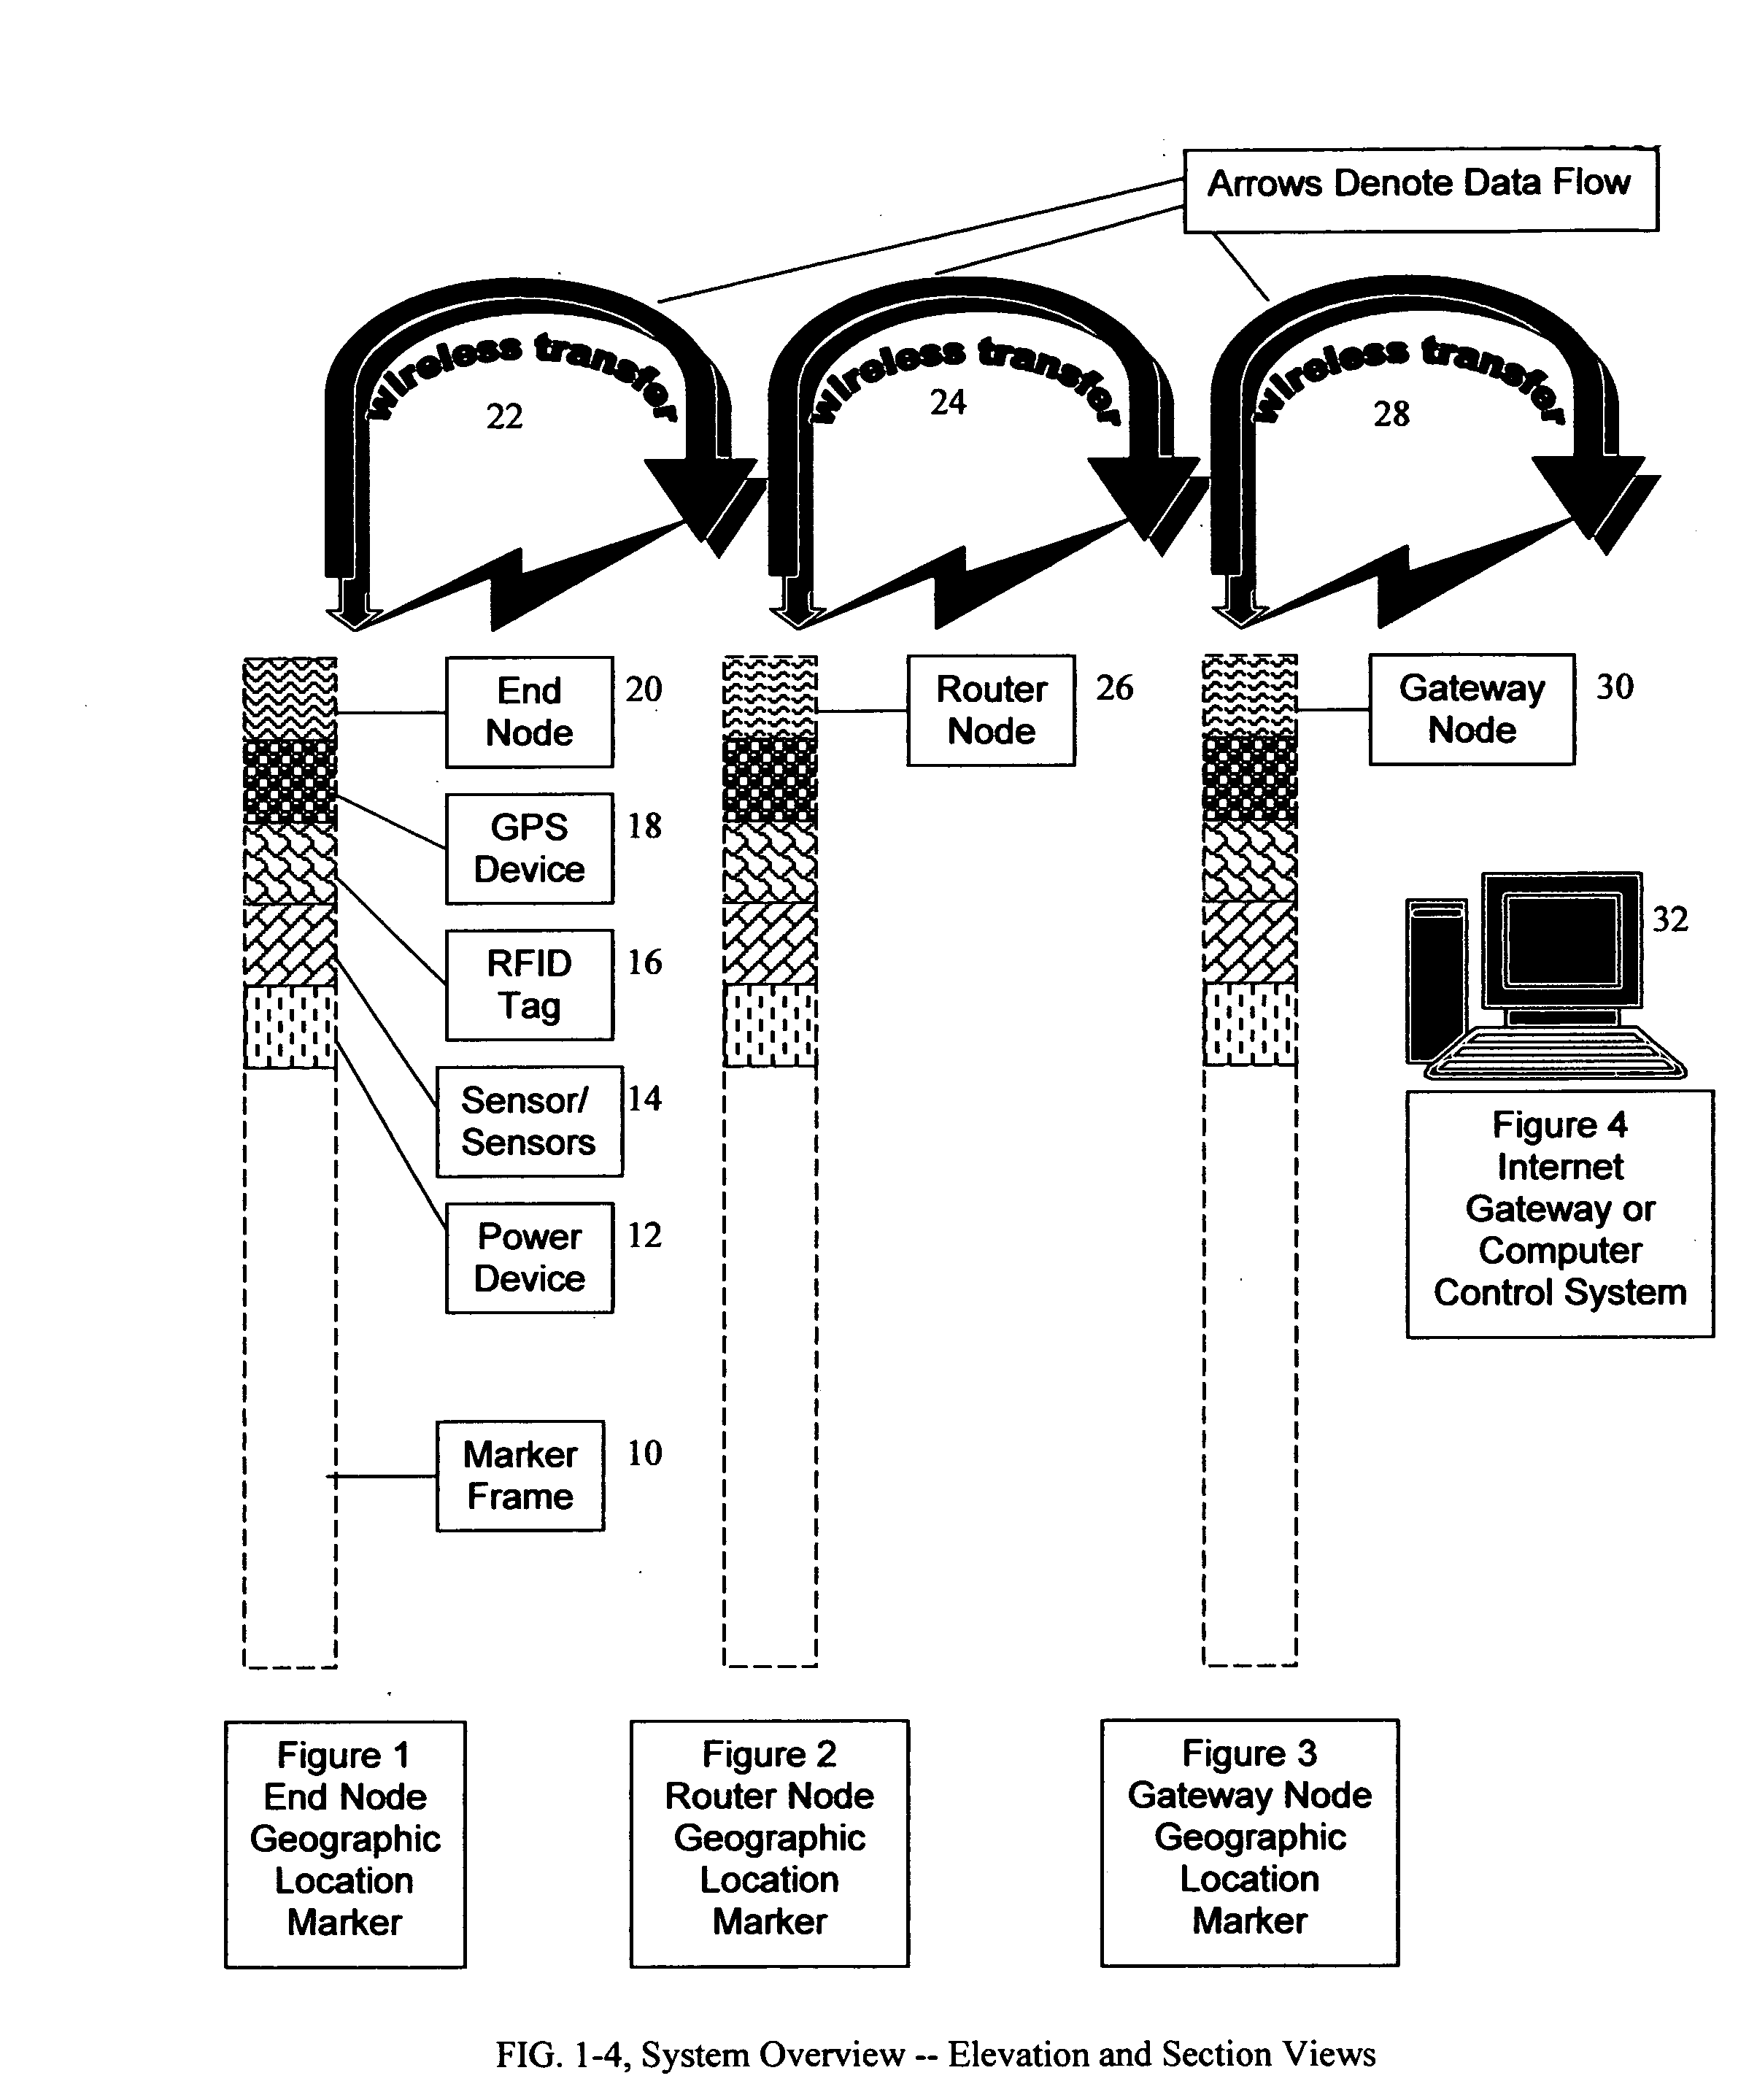 Internet-enabled, auto-networking, wireless, sensor-capable, specific geographic location marker based communications network system